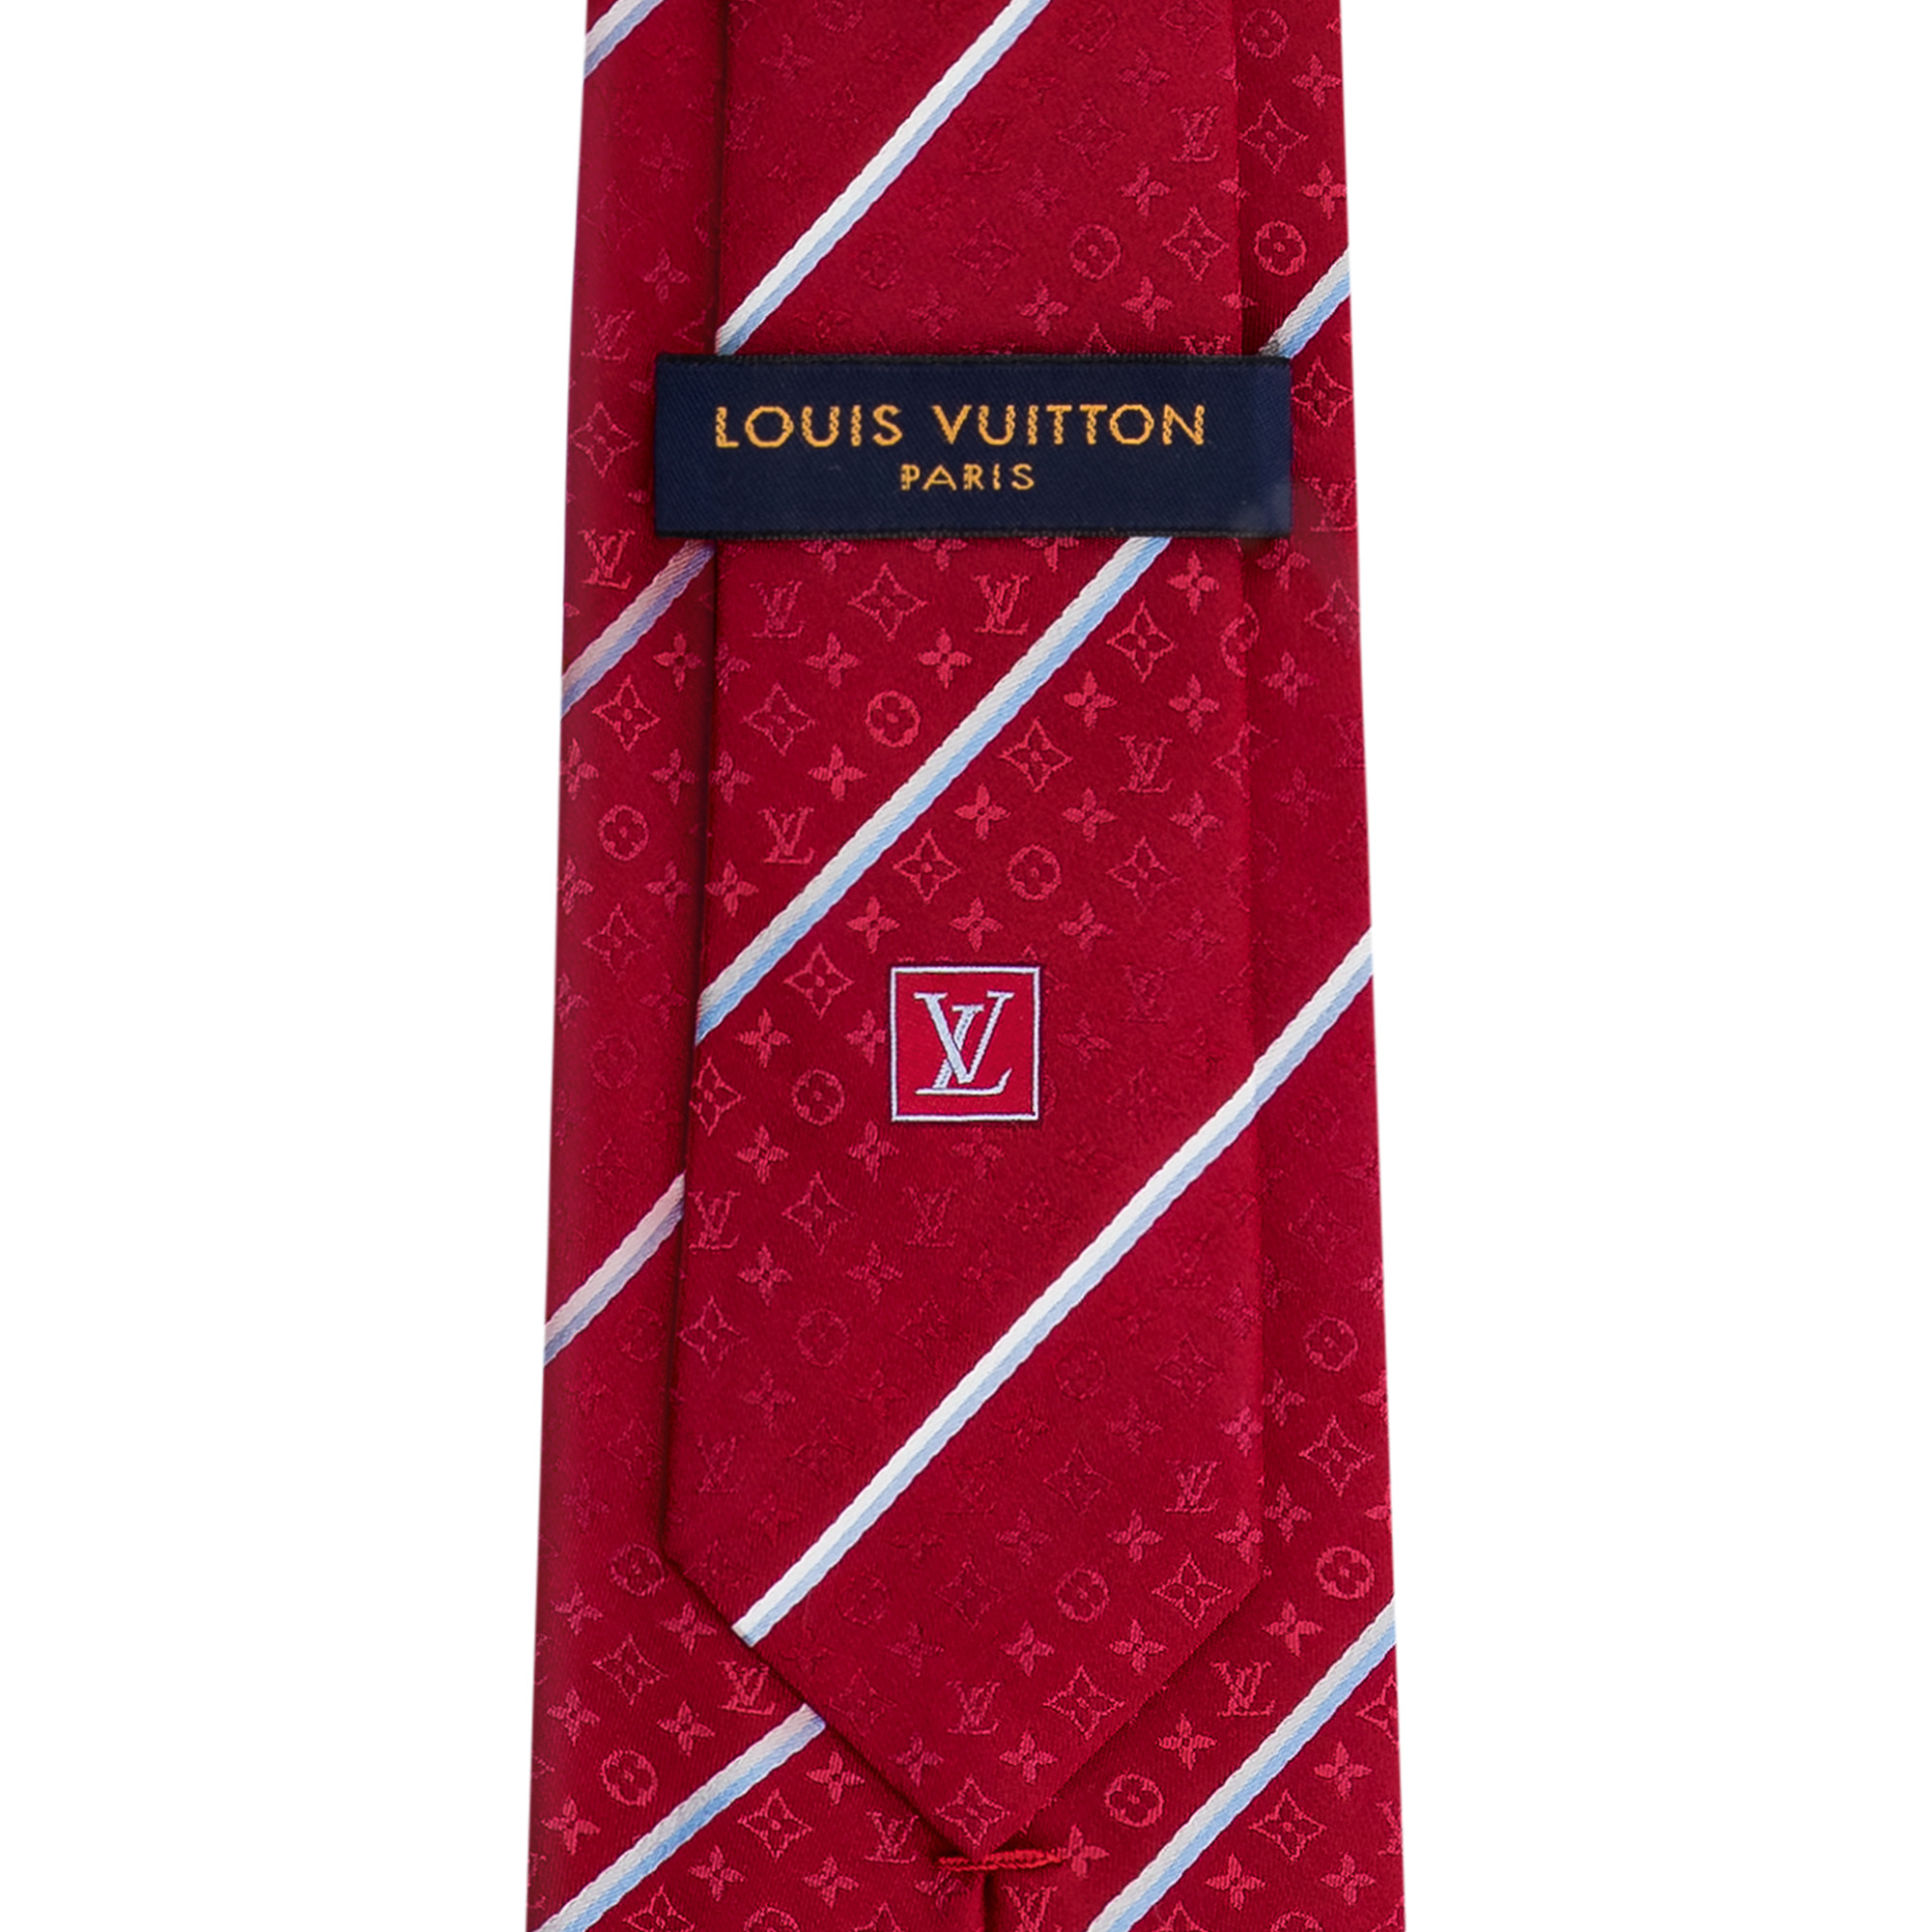 Over The Stripes Tie - 3